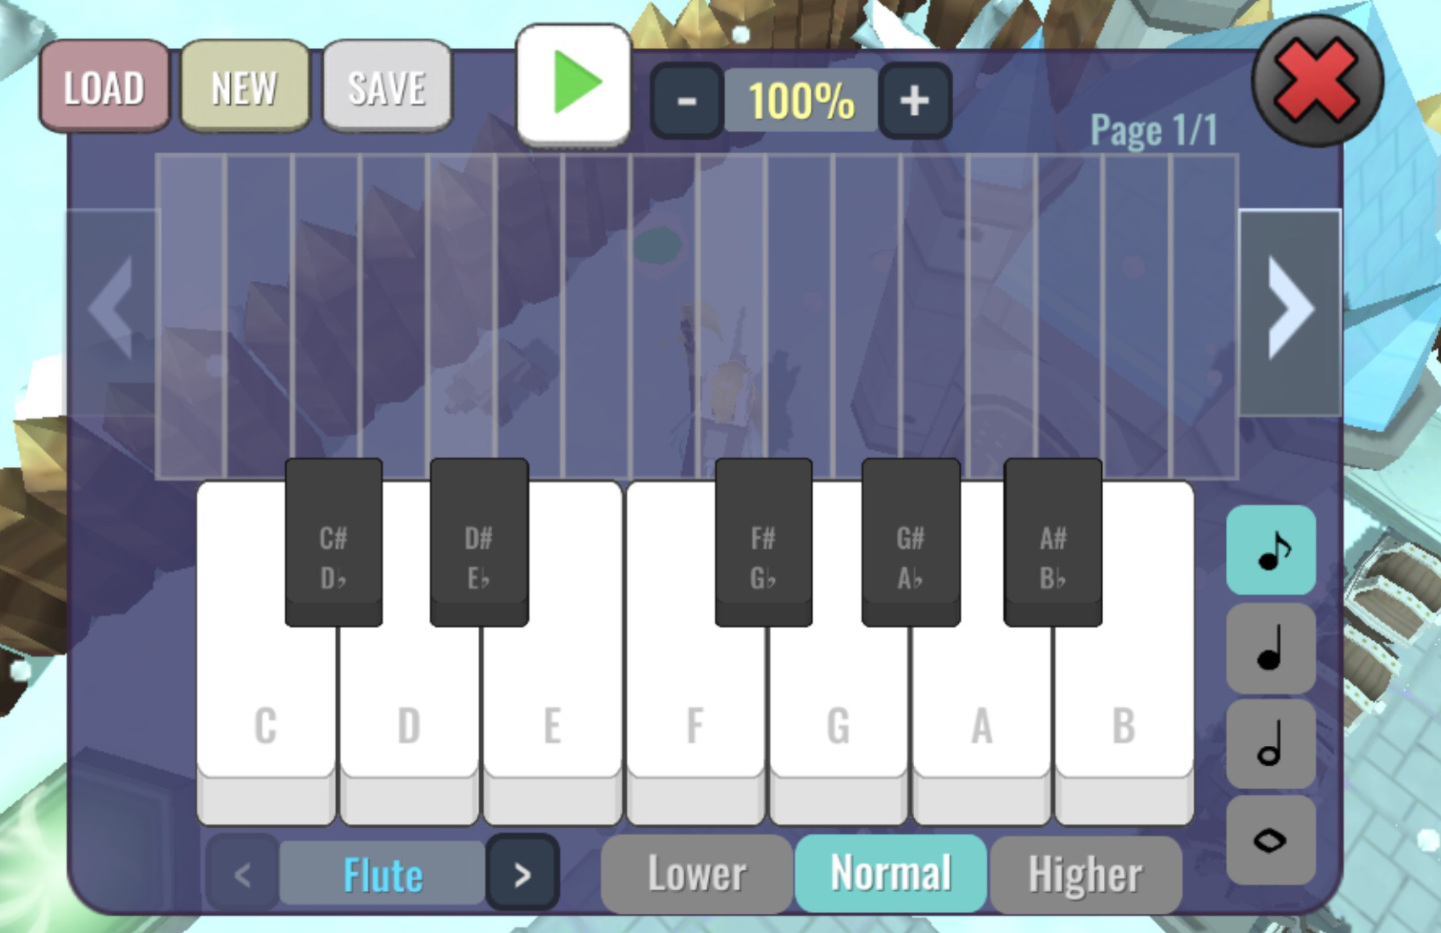 Animal Note Piano Game